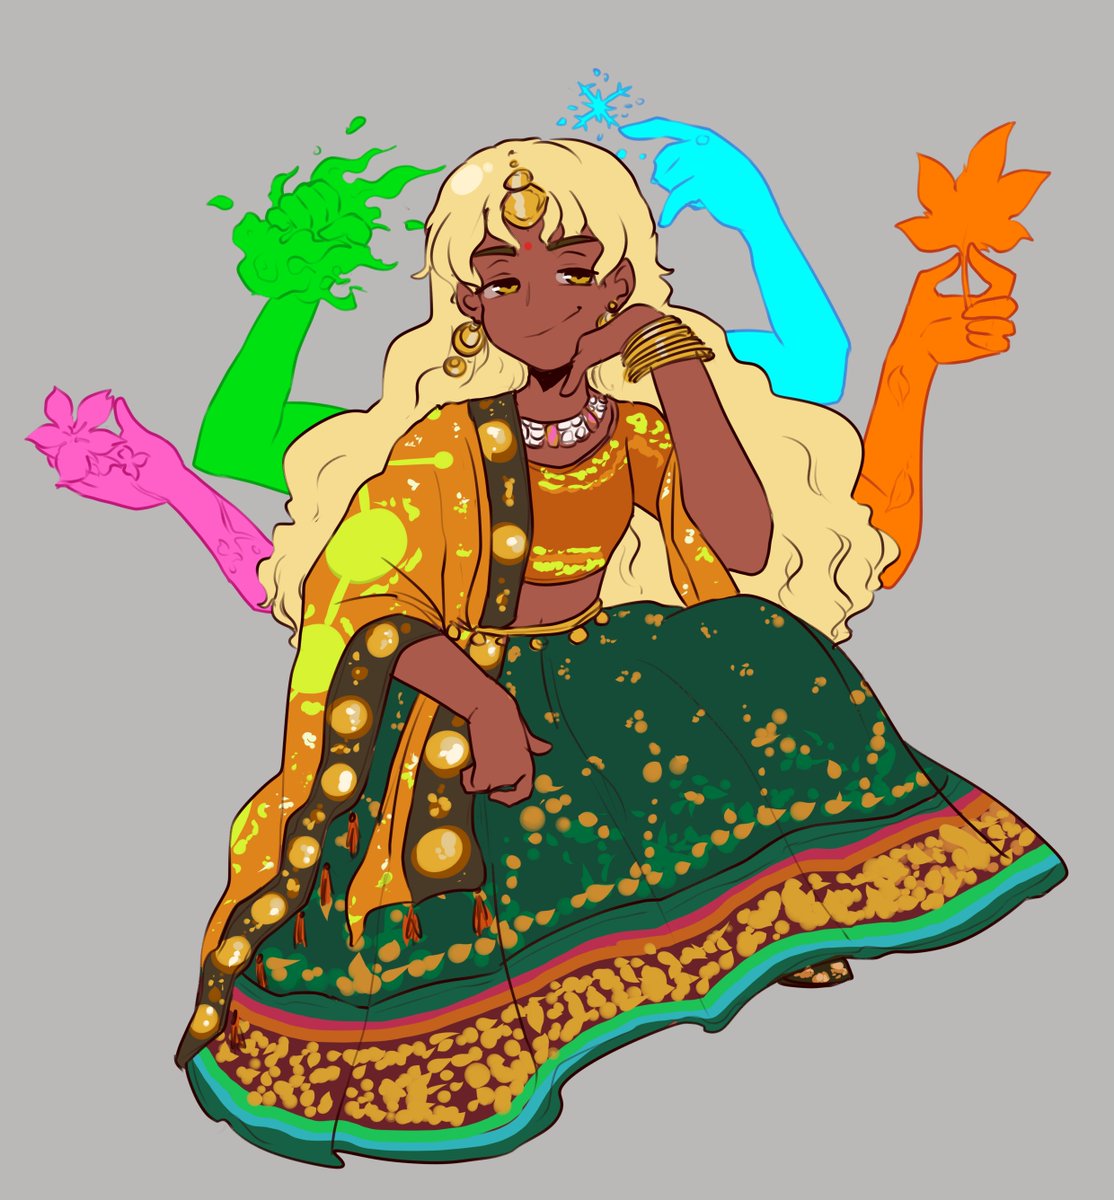 indian okina lives rent free in my head but i did struggle for a while to design her

i drew her in a lehenga choli!